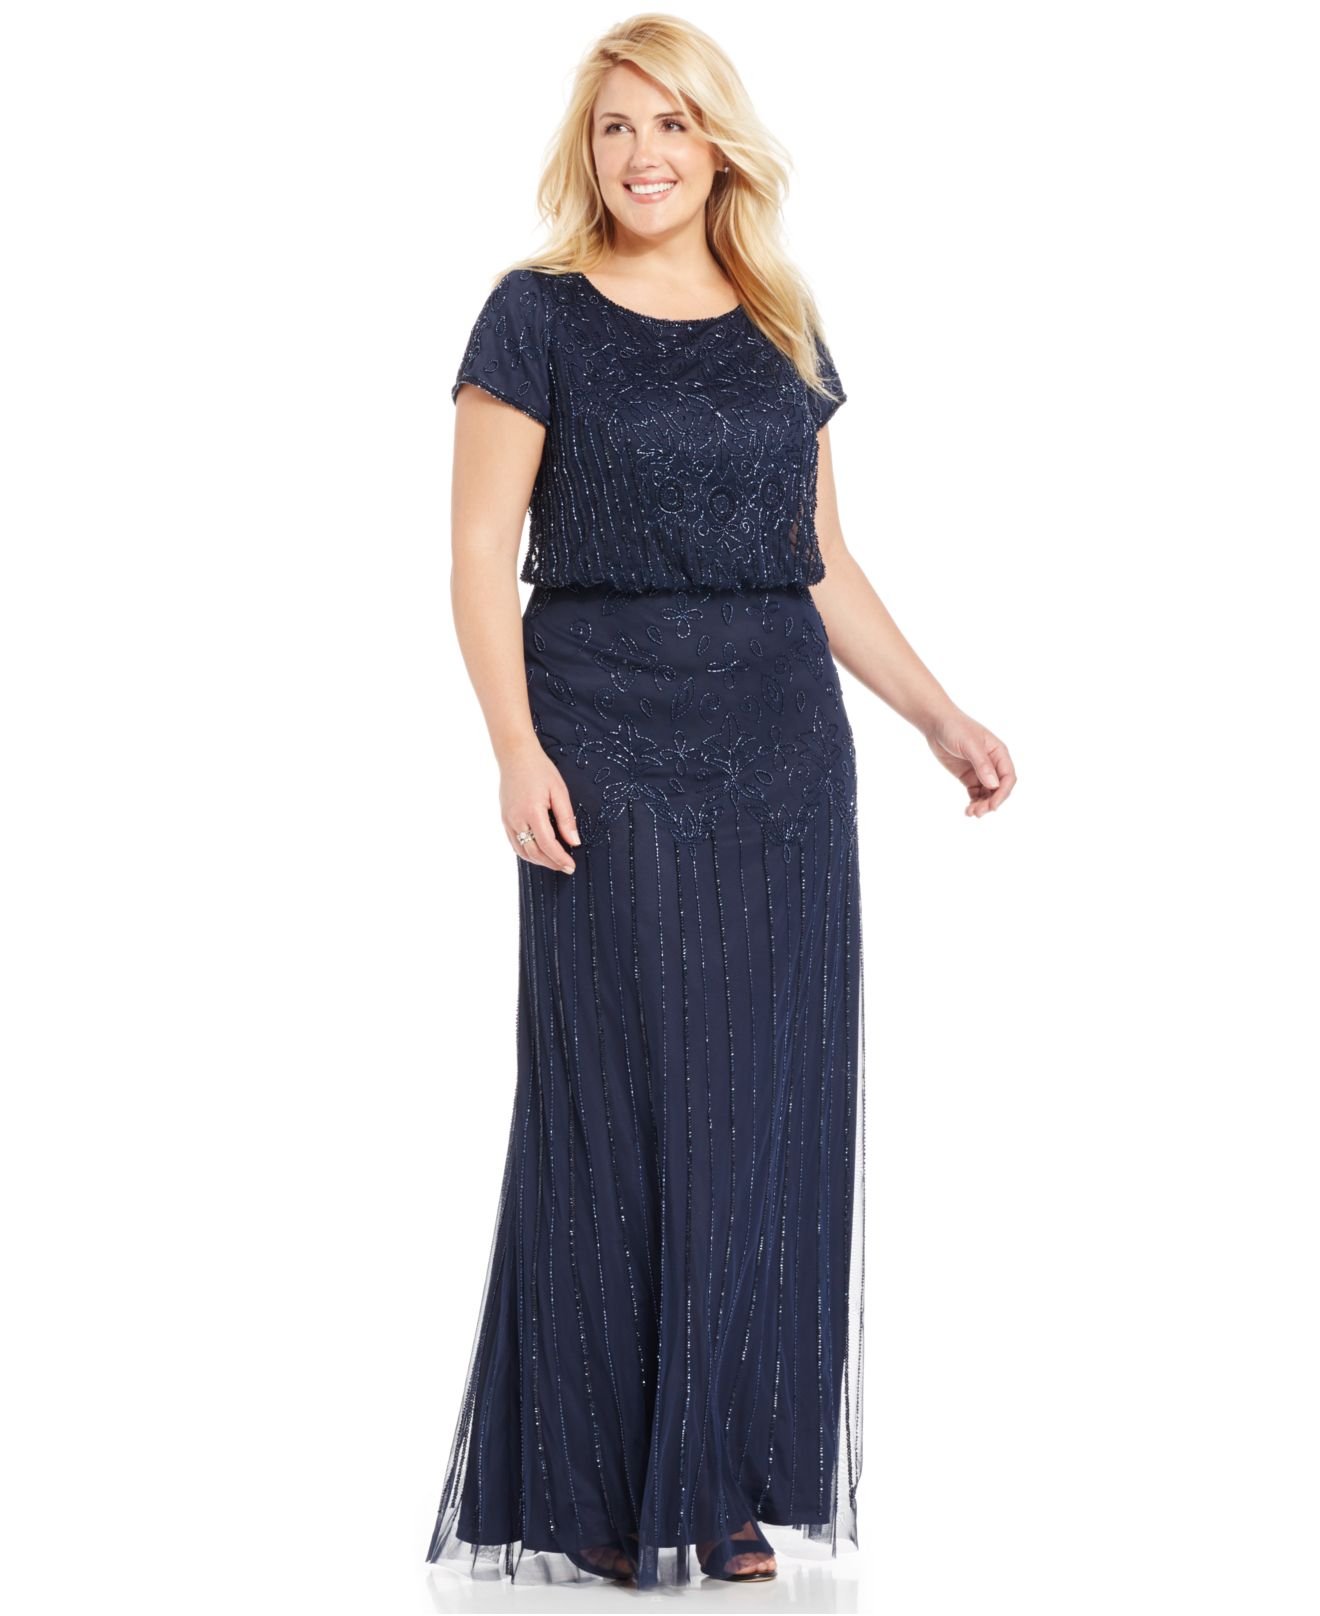 Lyst Adrianna Papell Plus Size Beaded Illusion Blouson Dress In Blue